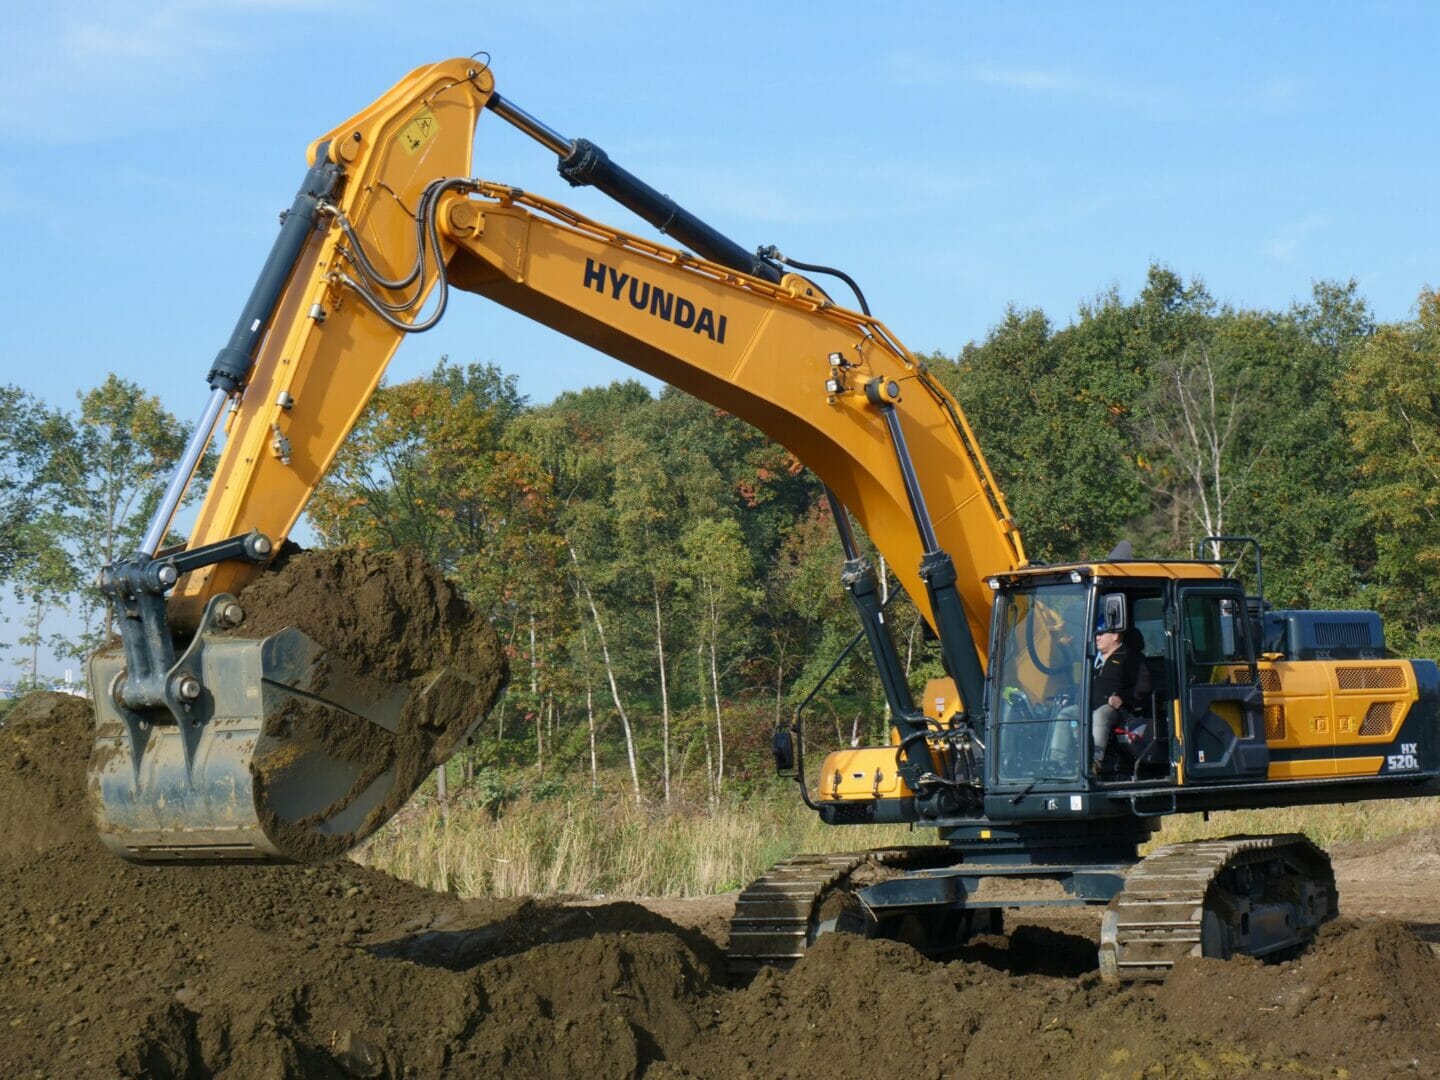 Hyundai appoints Agritrac Exports as new construction equipment dealer for Scotland